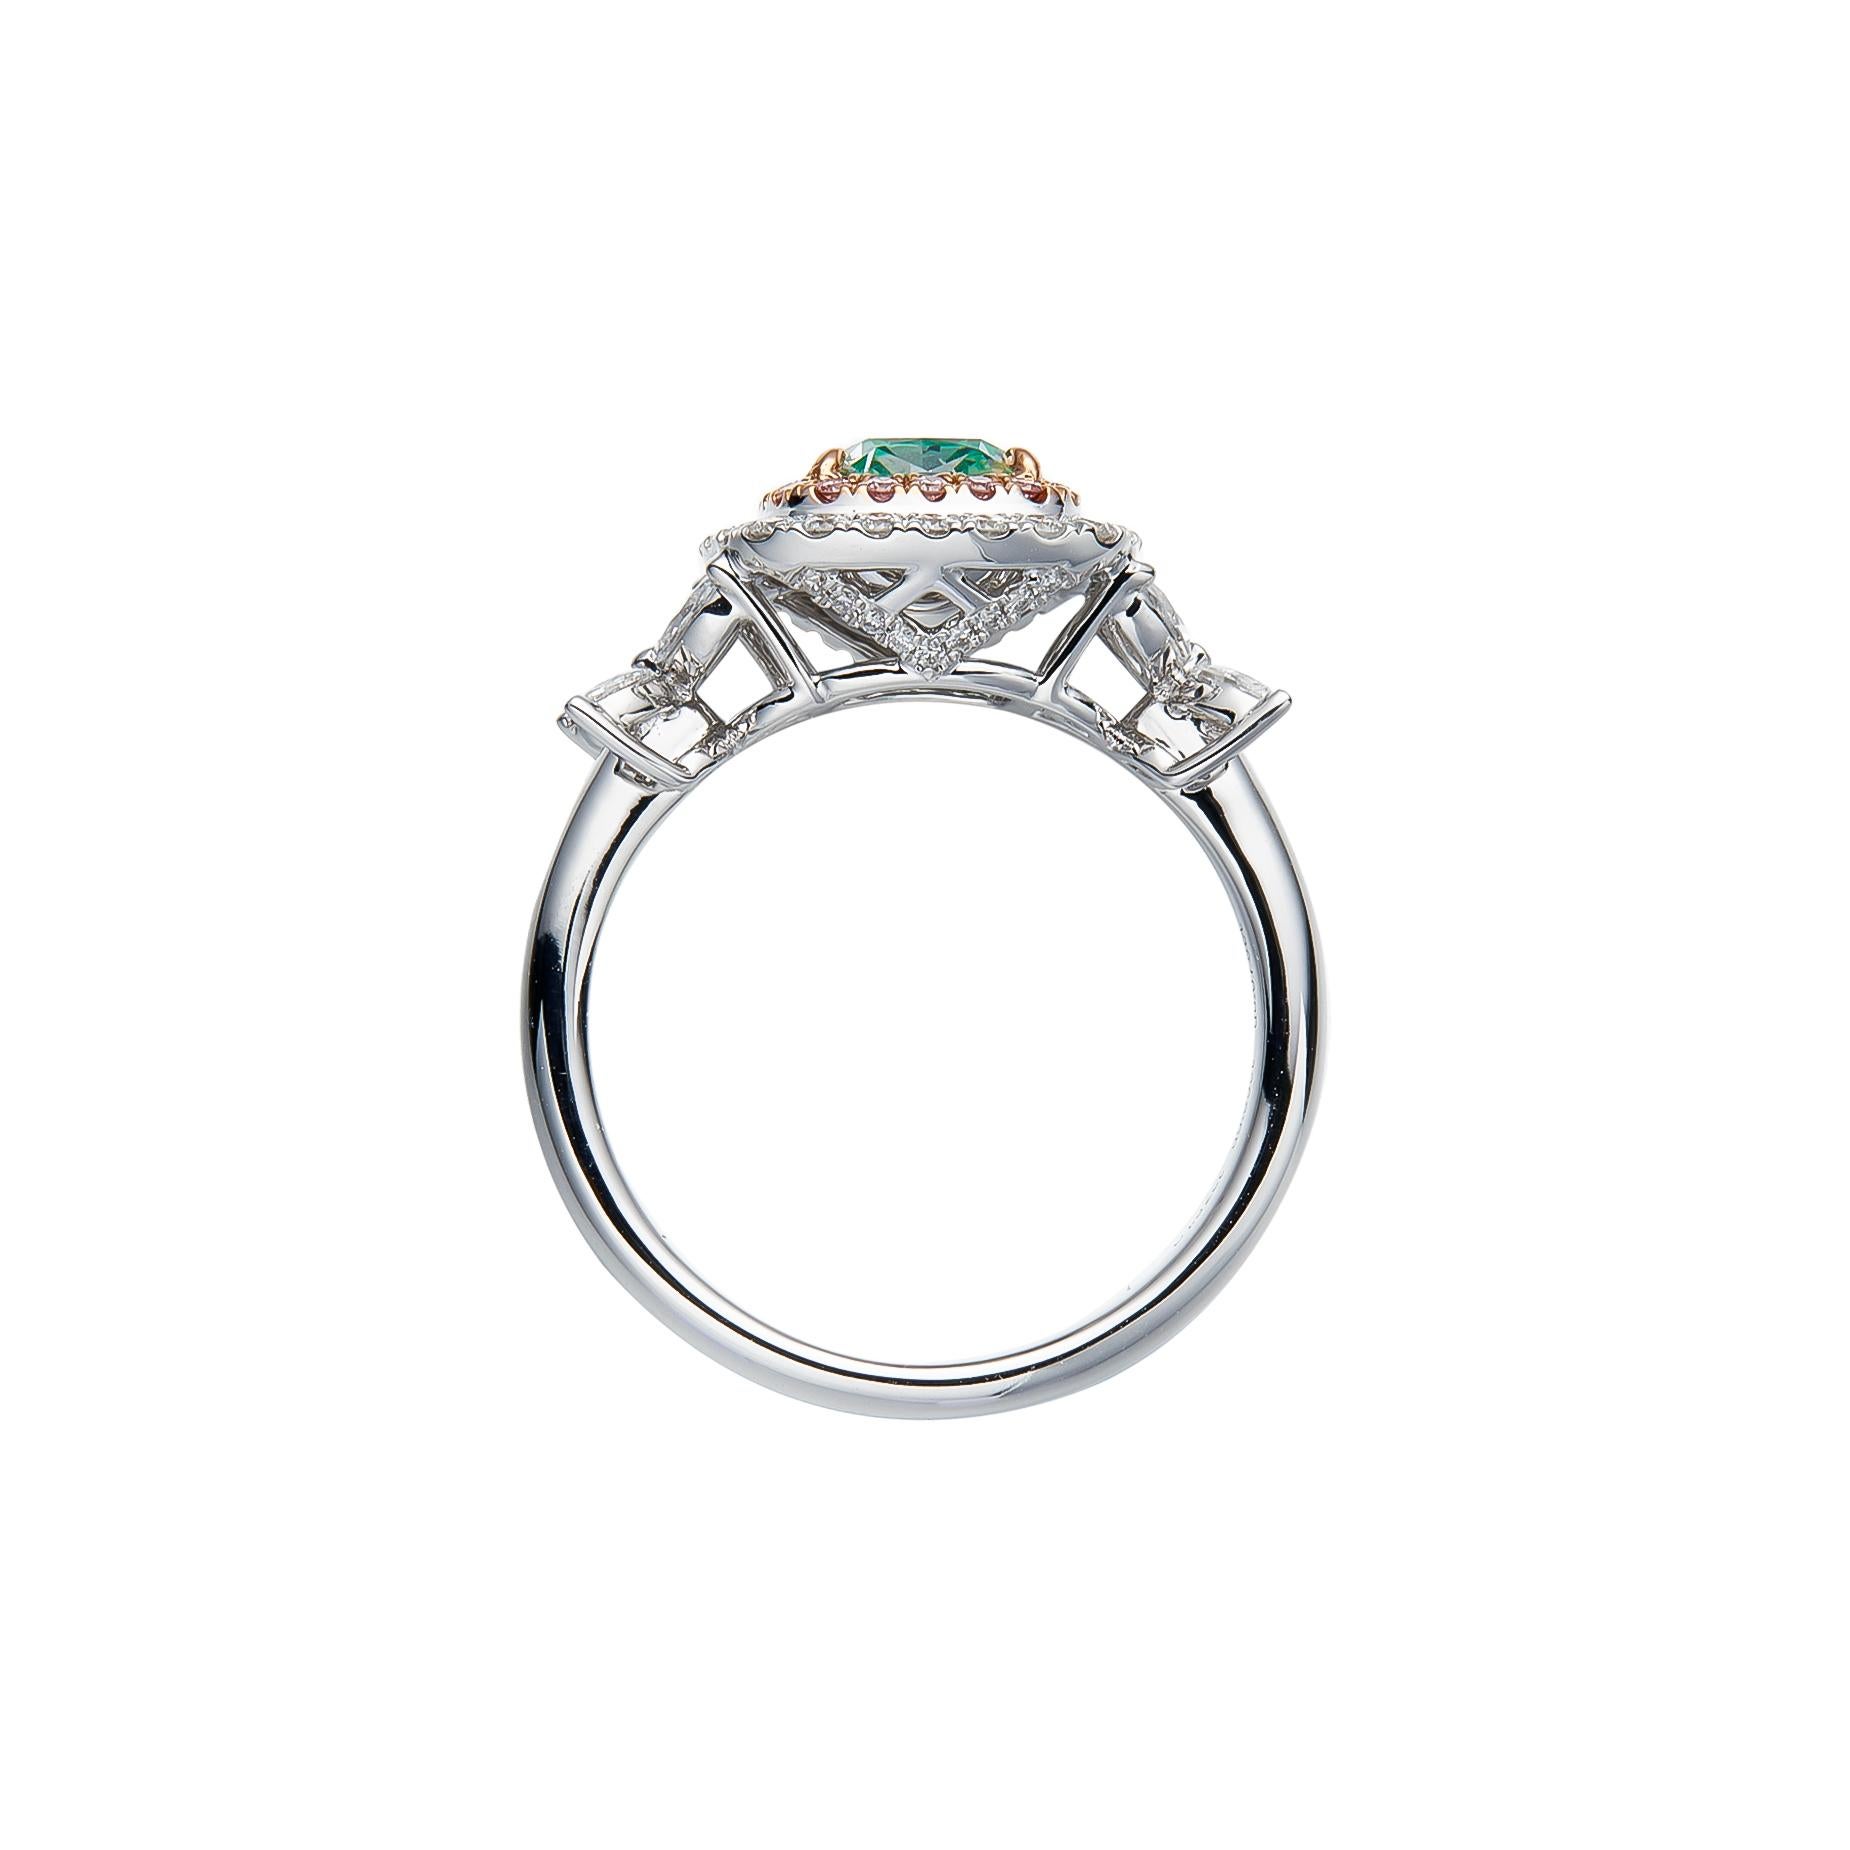 Diamond Certification: This exquisite ring boasts a GIA (Gemological Institute of America) certification, ensuring the authenticity and quality of the featured diamond.

Diamond Weight and Shape: The centerpiece of this ring is a remarkable 1.02ct